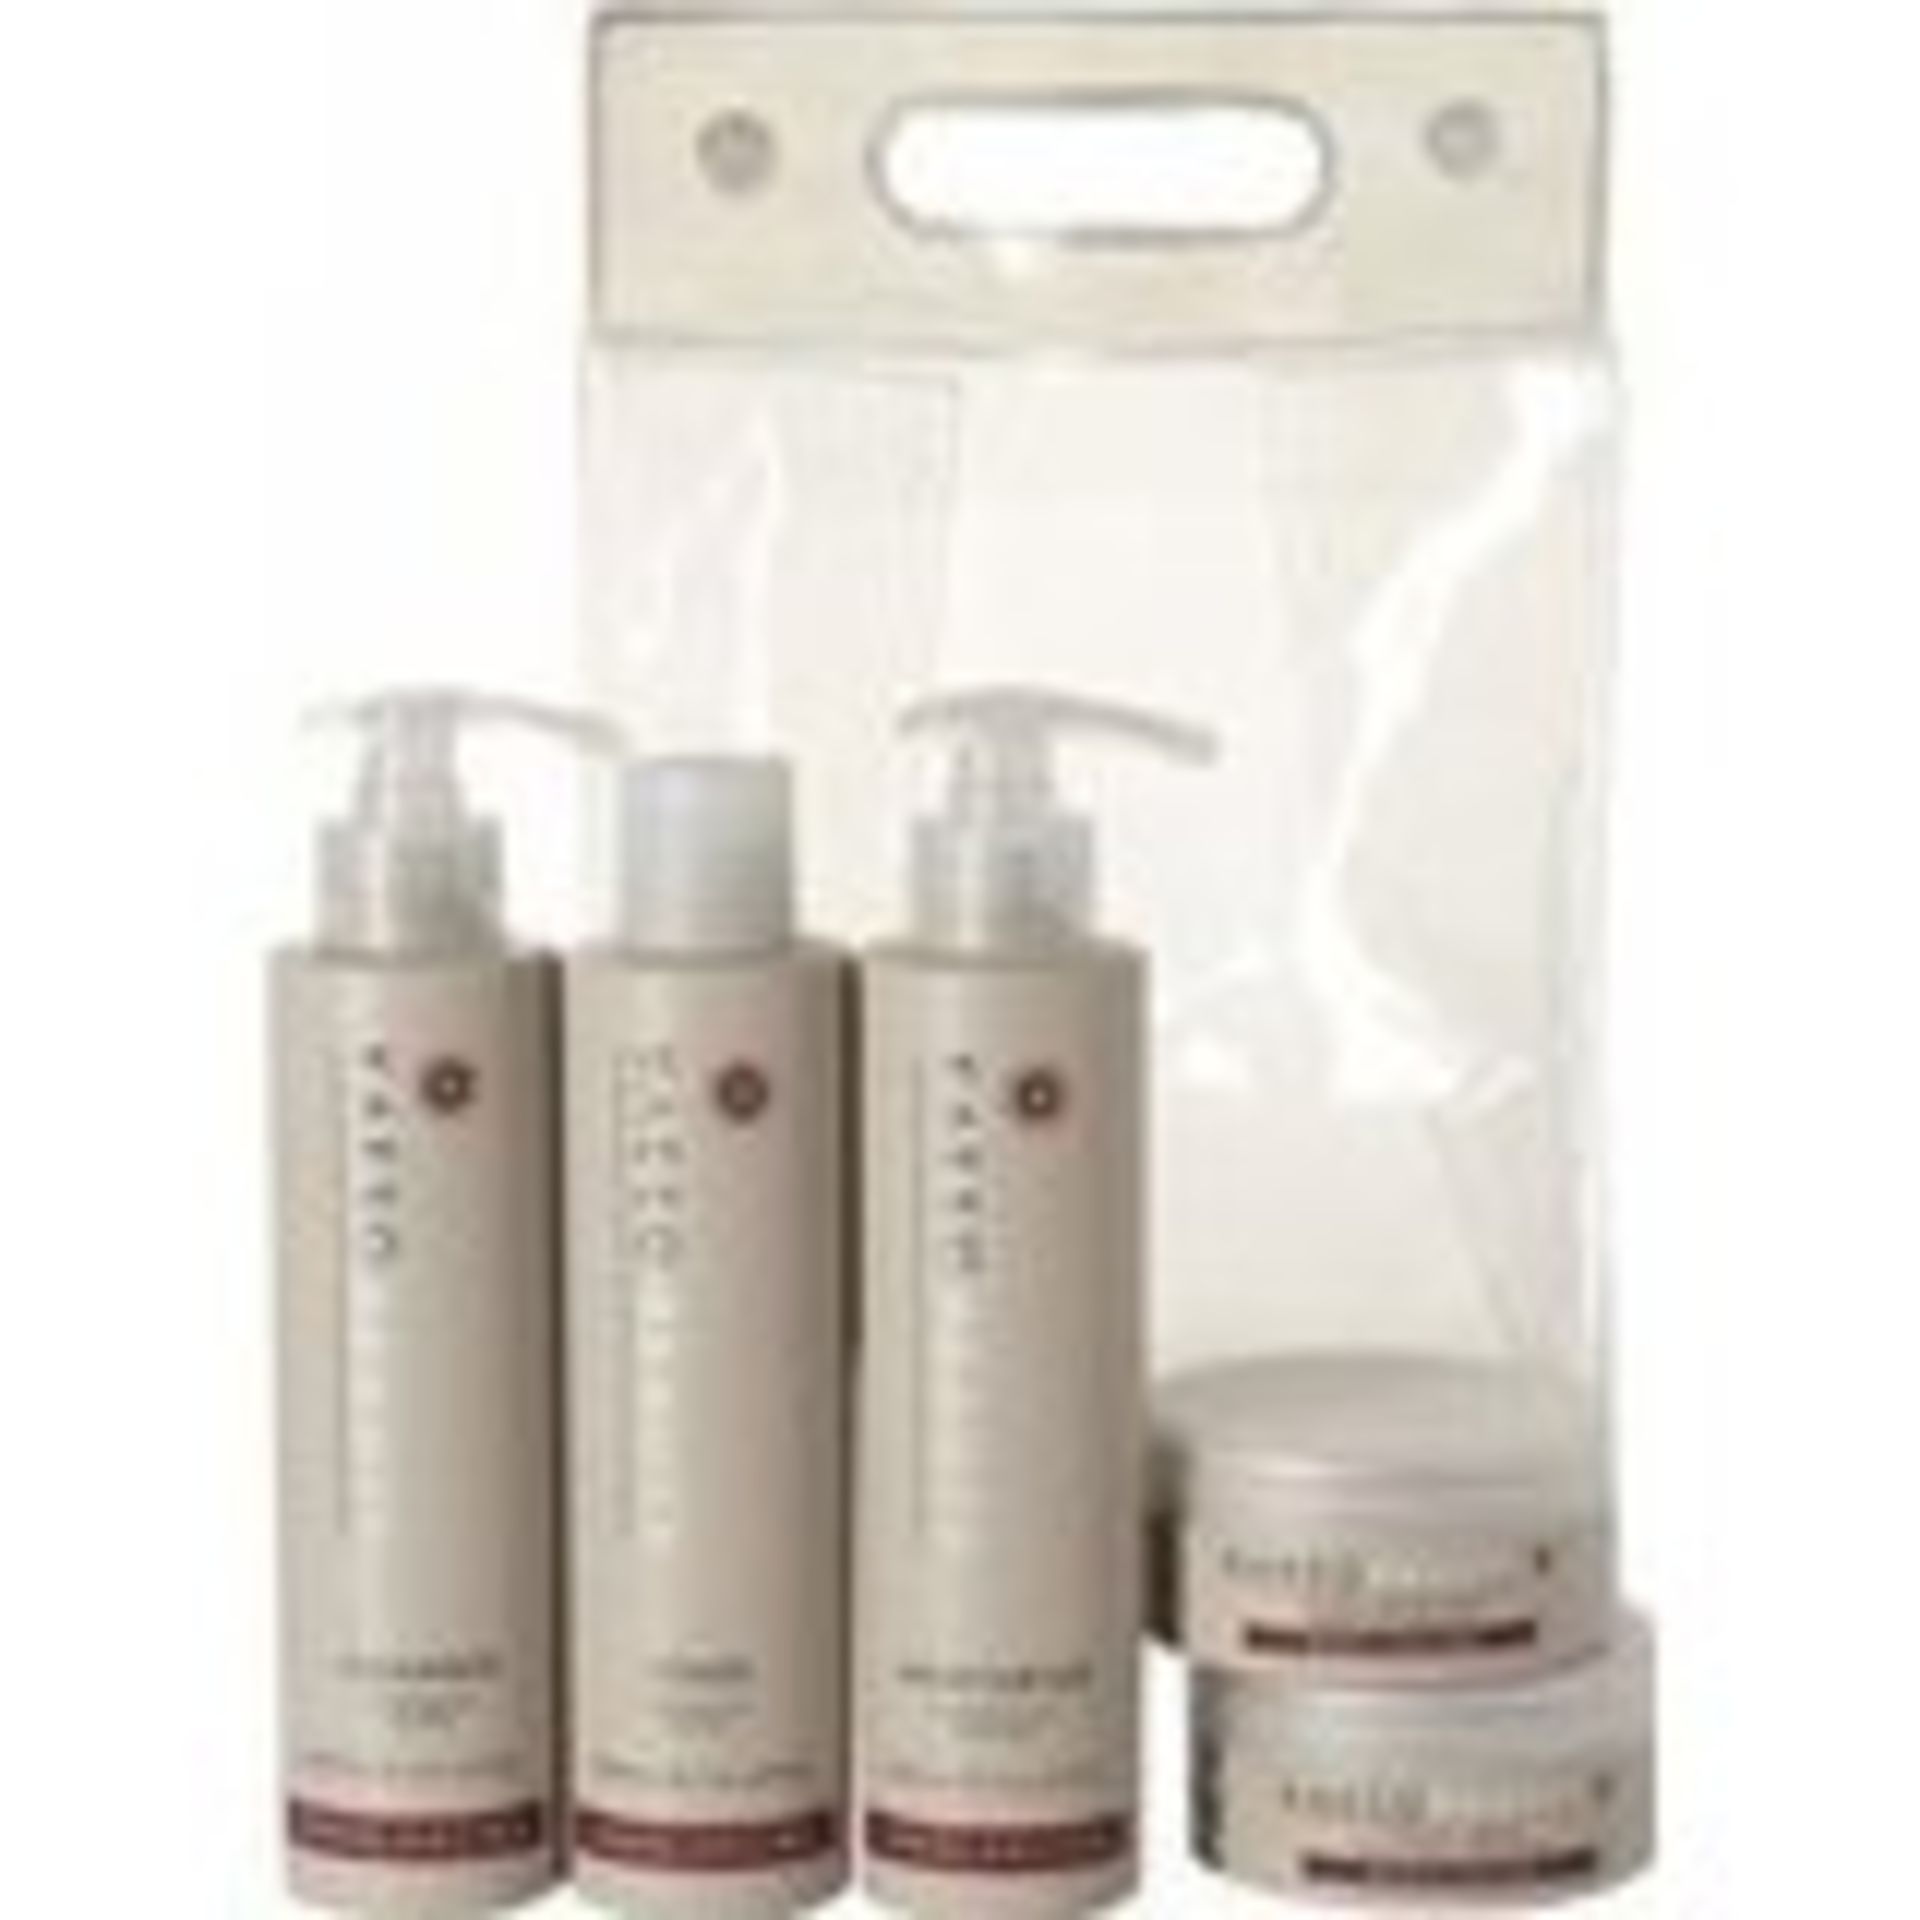 GROOMING PRODUCTS - 1 Box of 39 units - Latest AMZ price £600 - Image 4 of 10